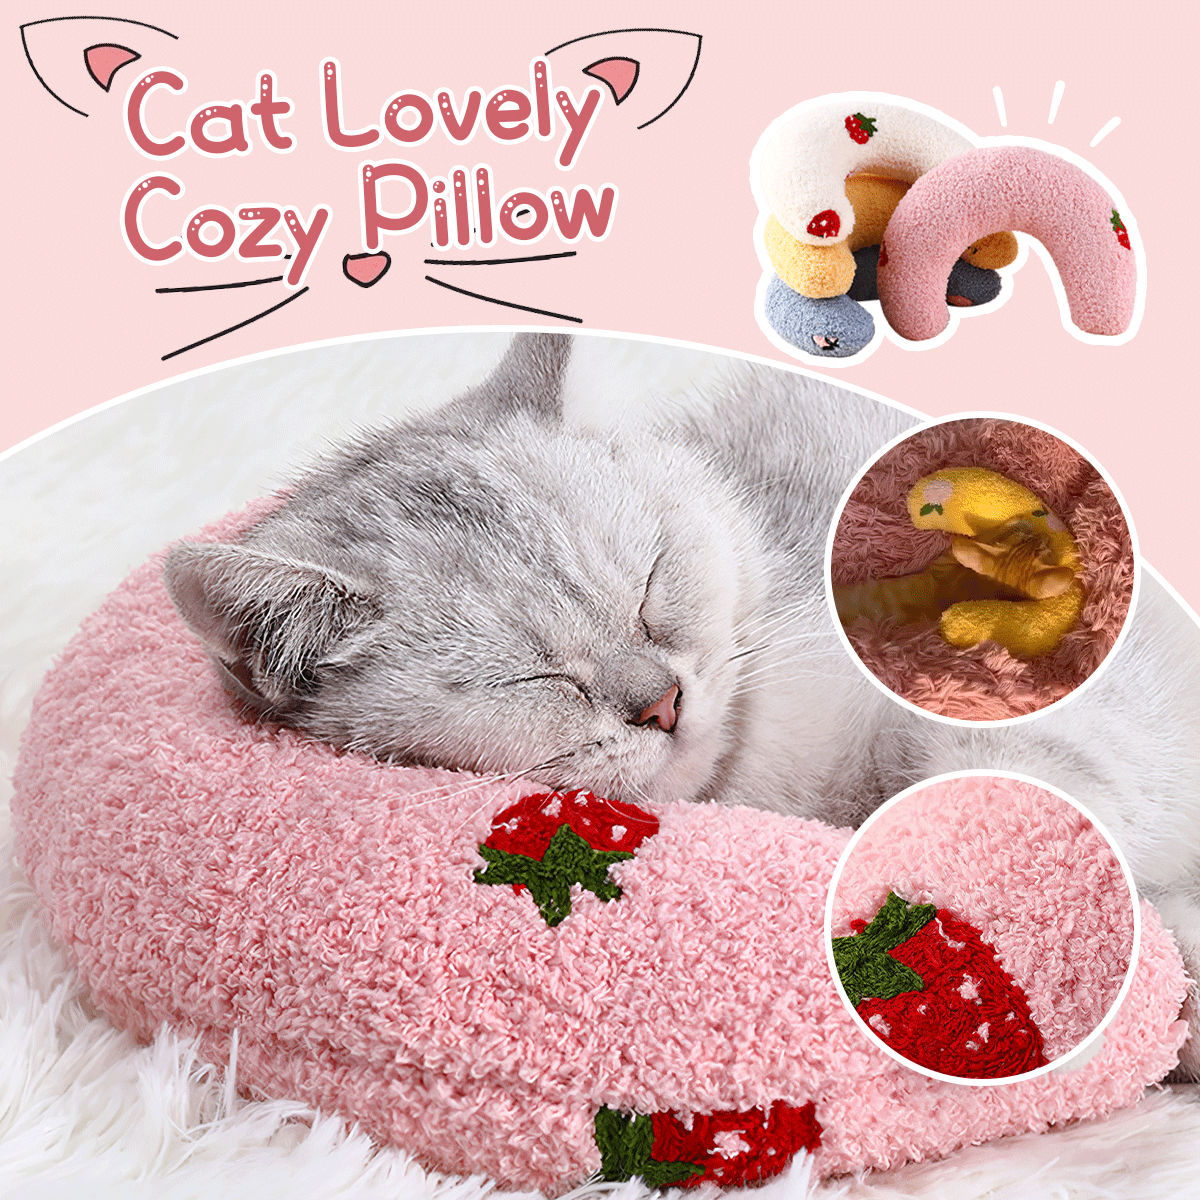 Cat Lovely Cozy Pillow | Washable Cat Bed | Soft & Plush Bed for Cats